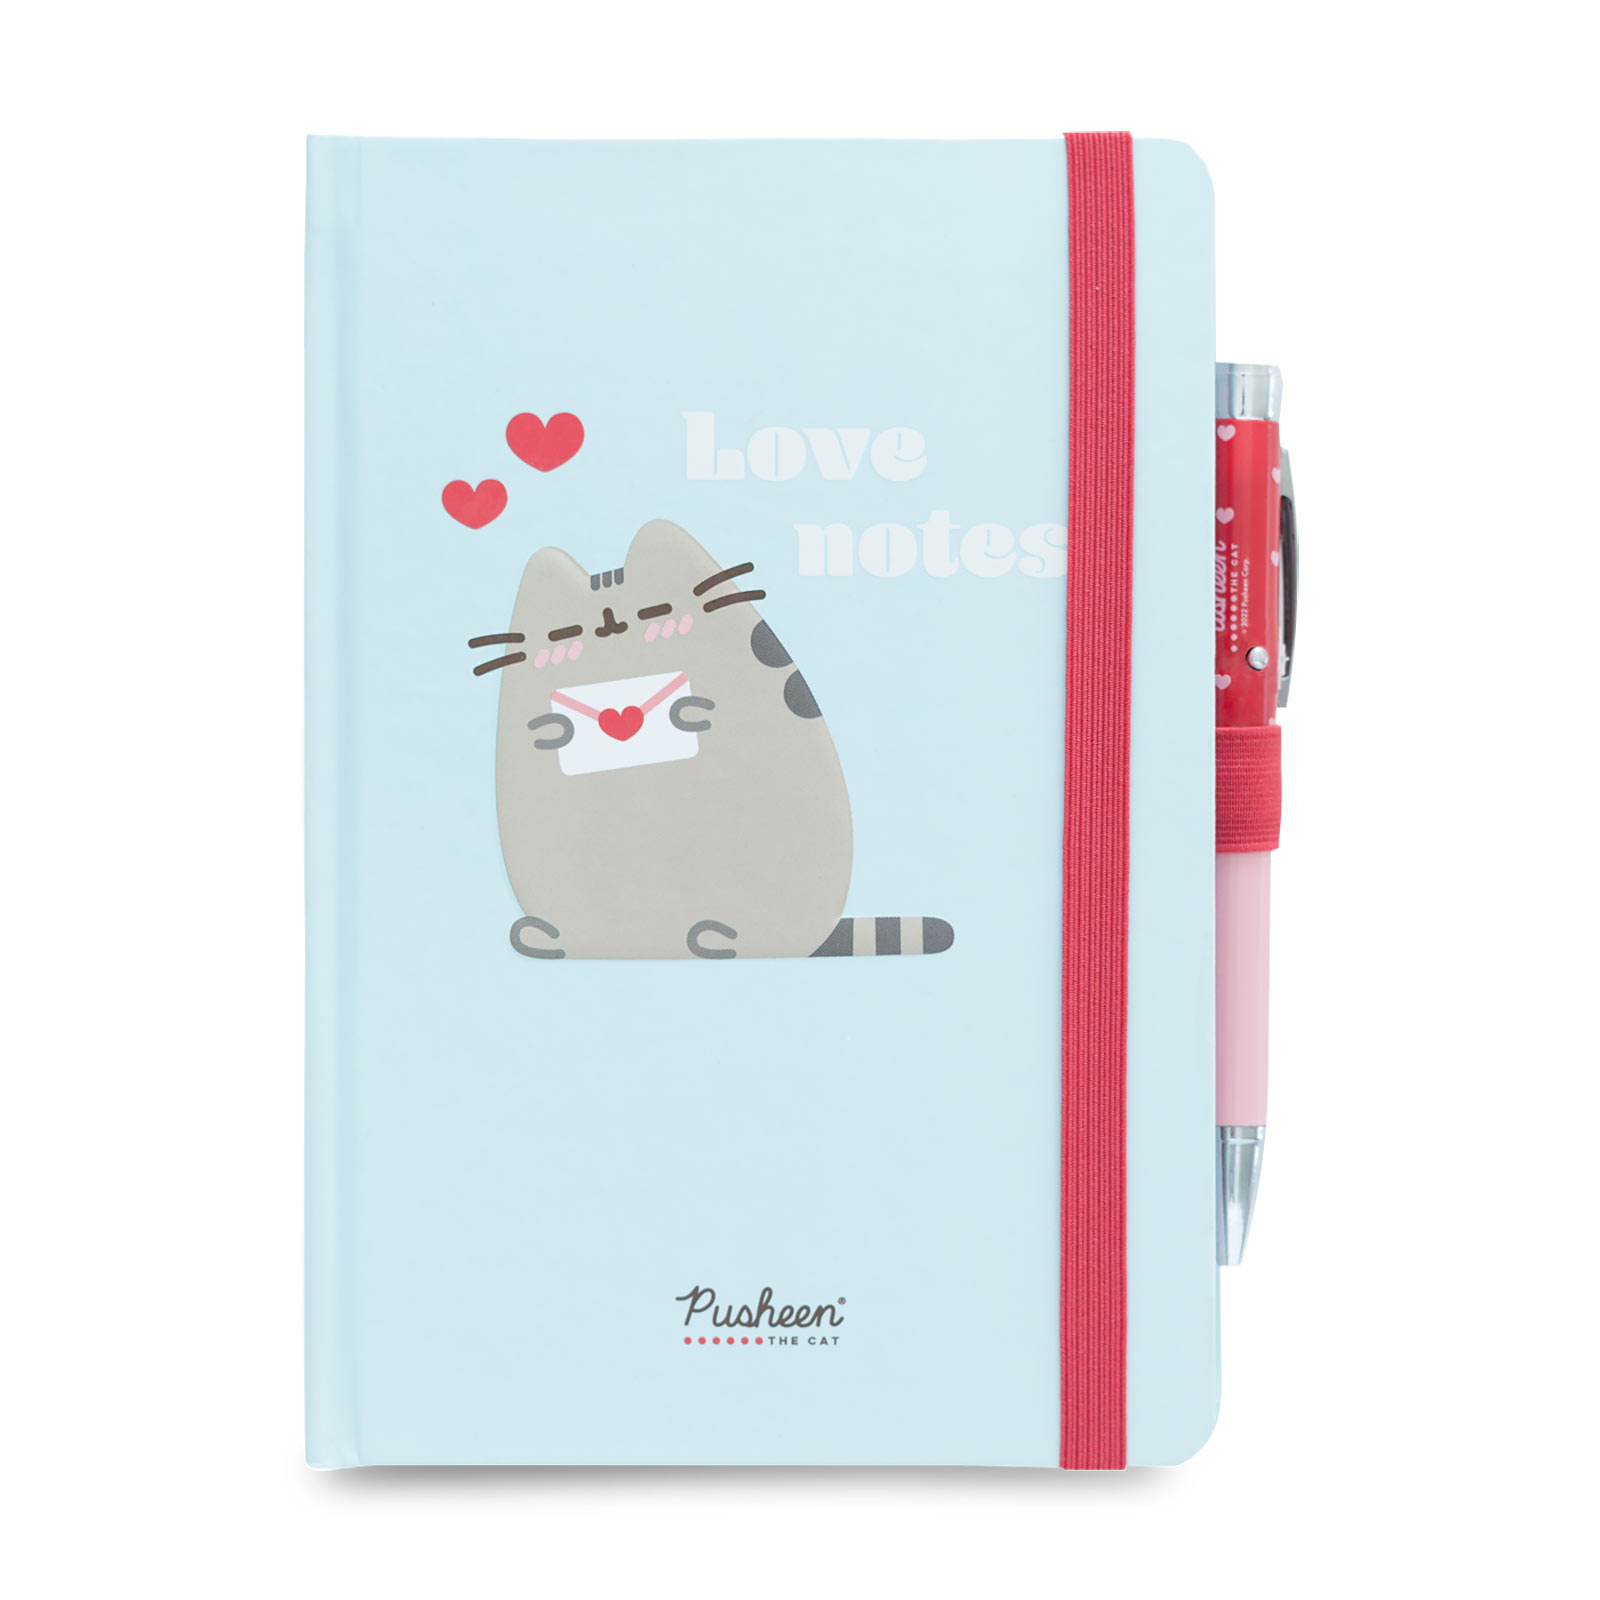 Pusheen - Purrfect Love Notebook with Projector Pen